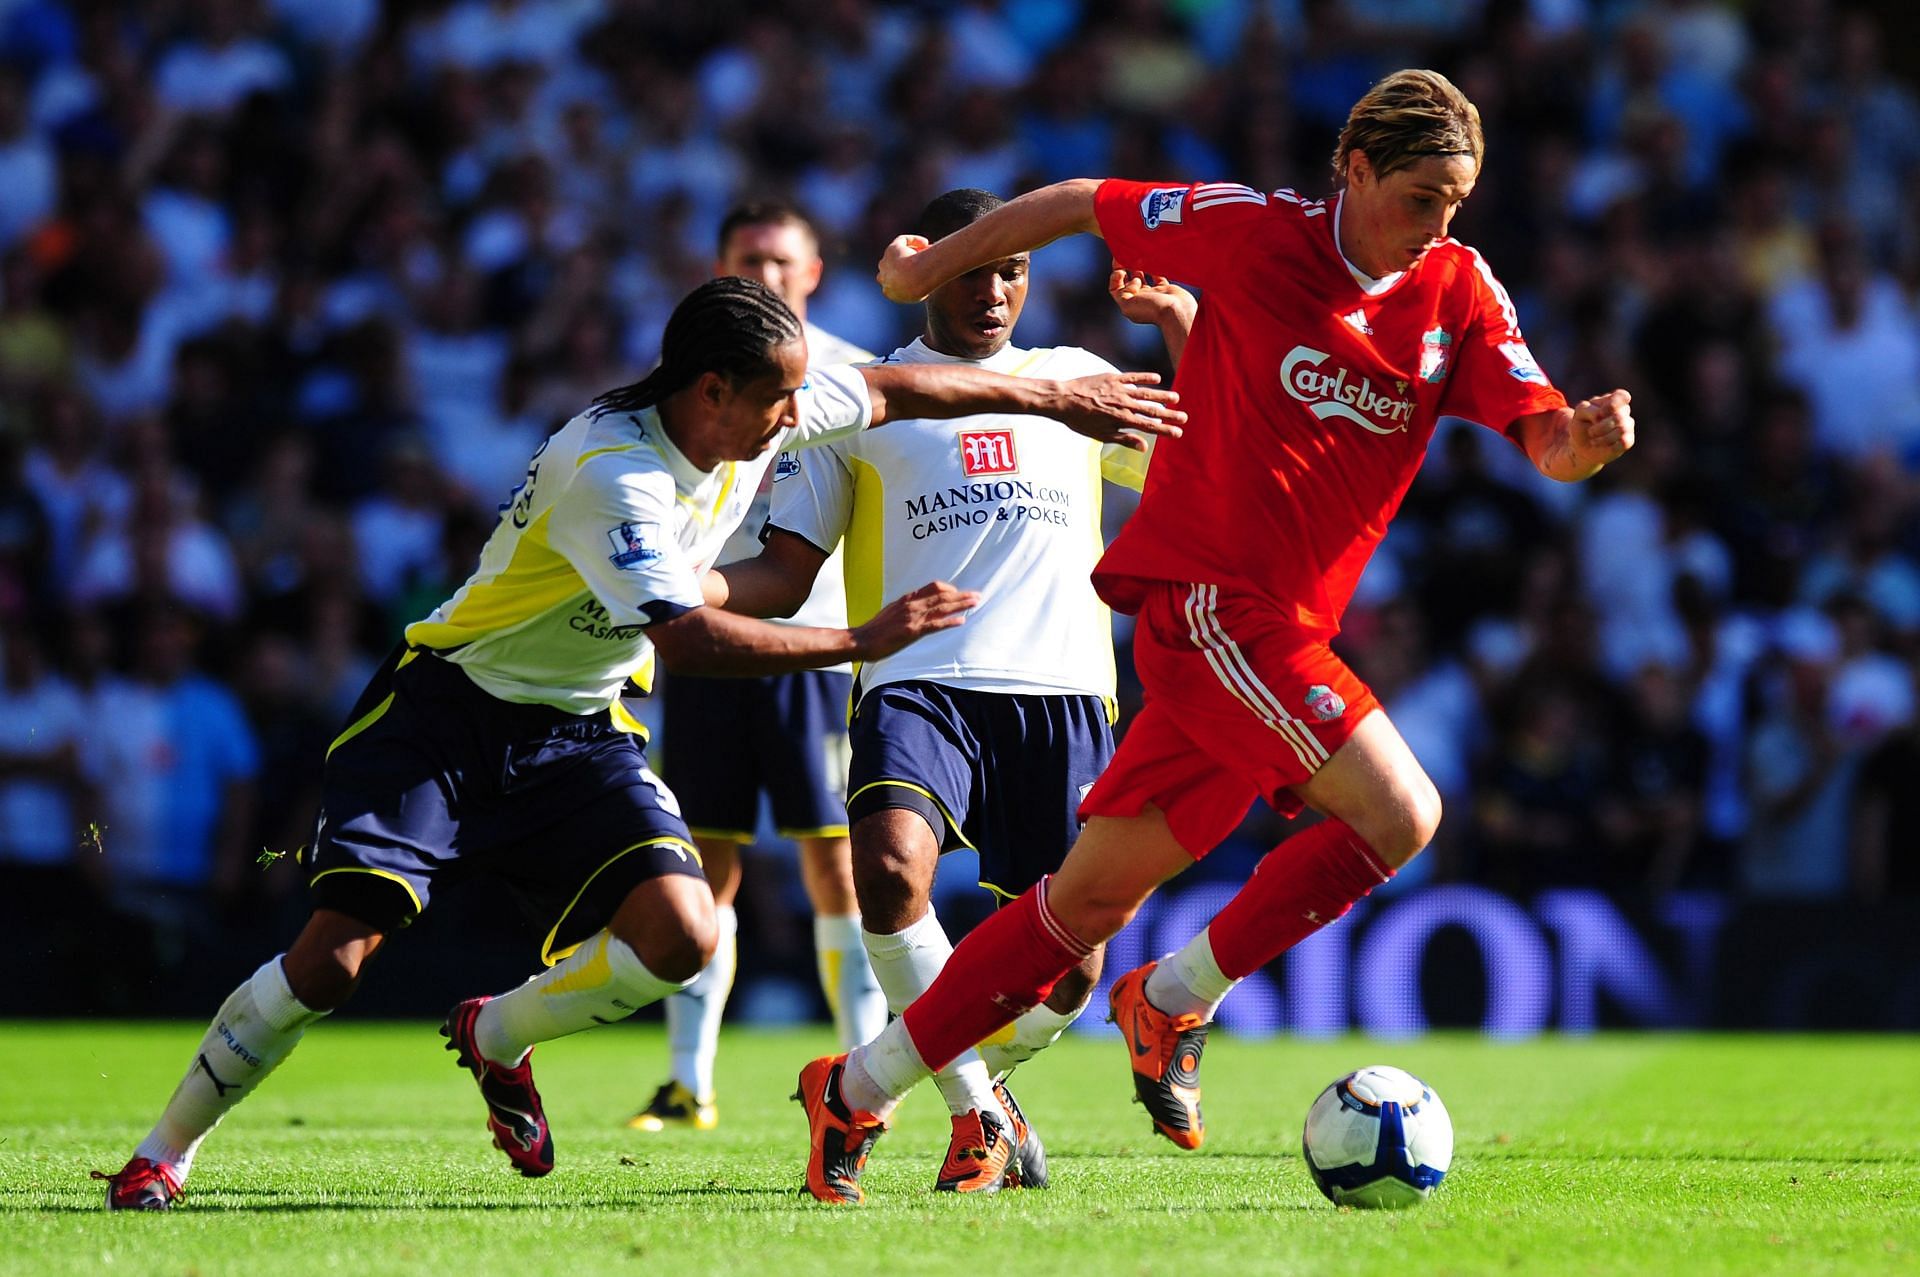 Fernando Torres was a feared striker across Europe while he was at Liverpool.